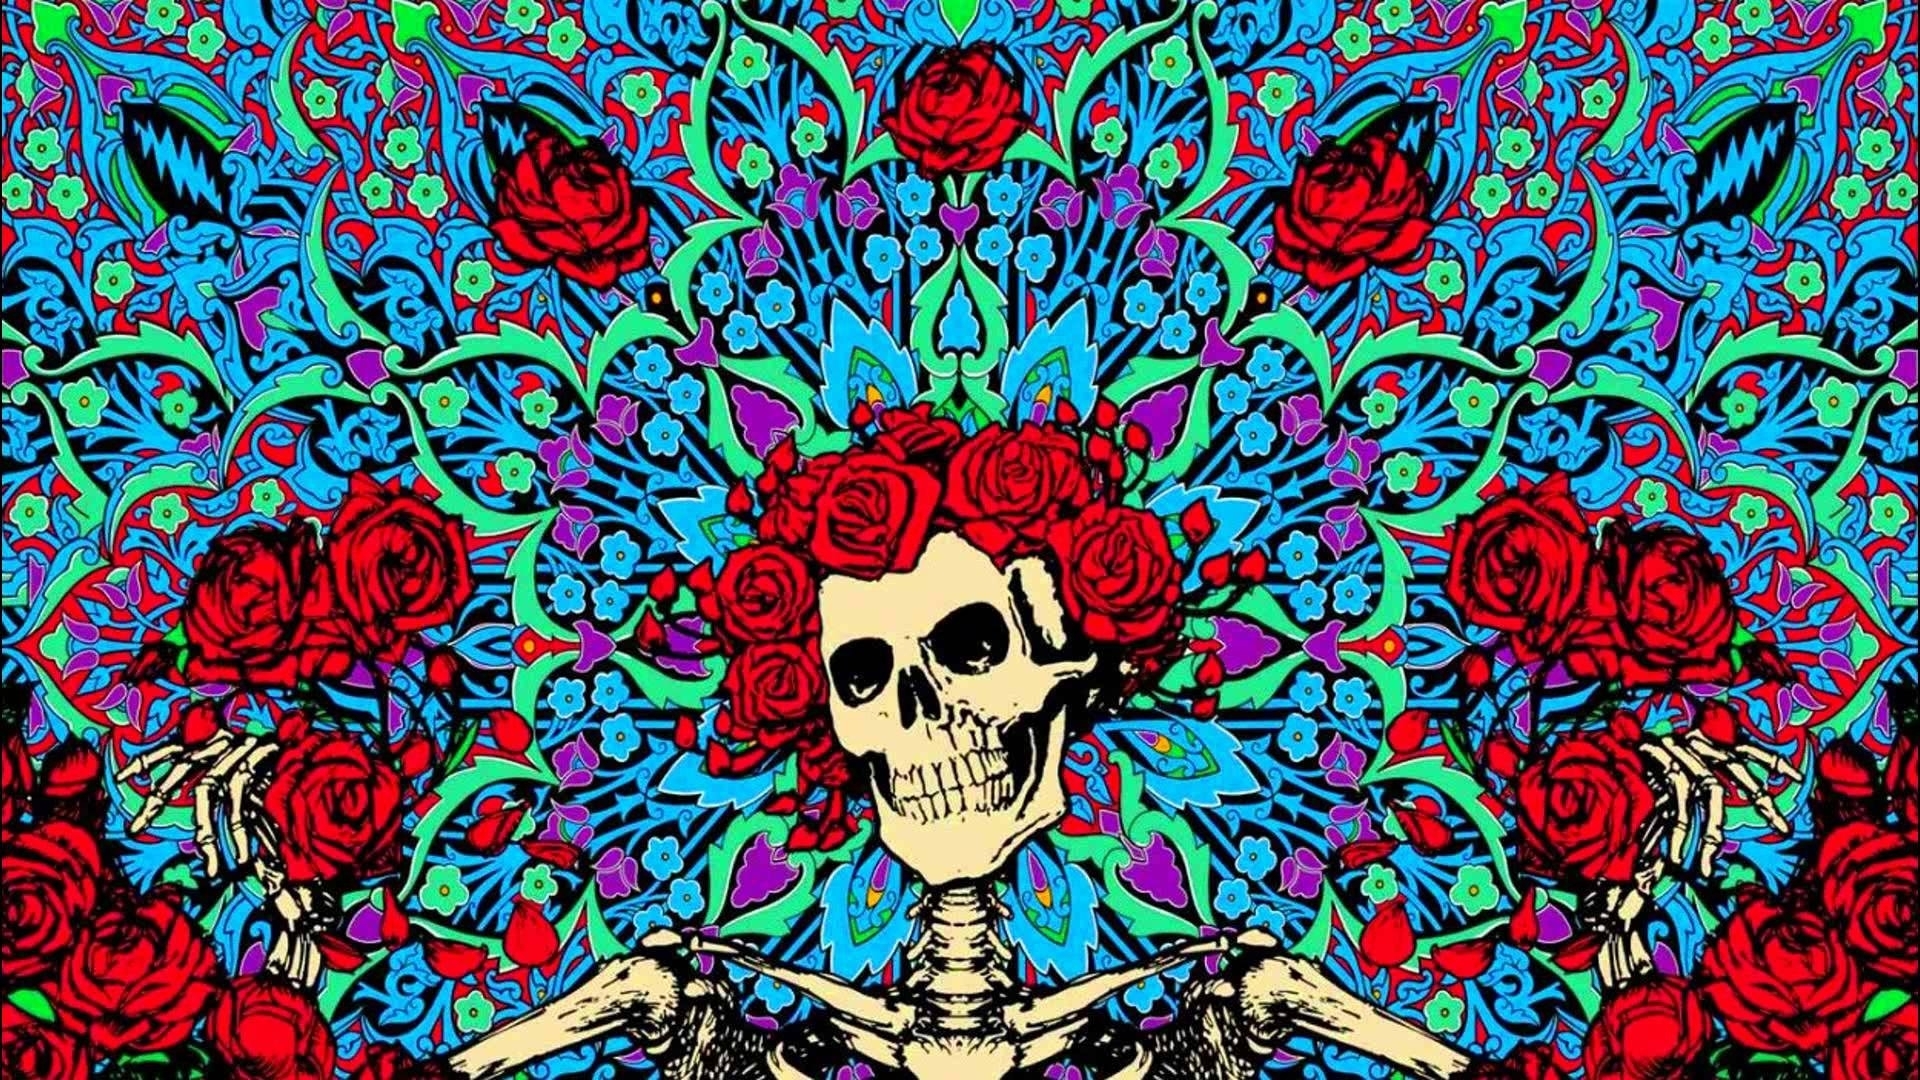 grateful-dead-wallpaper-c2b7e291a0-download-free-amazing-wallpapers-for.jpg